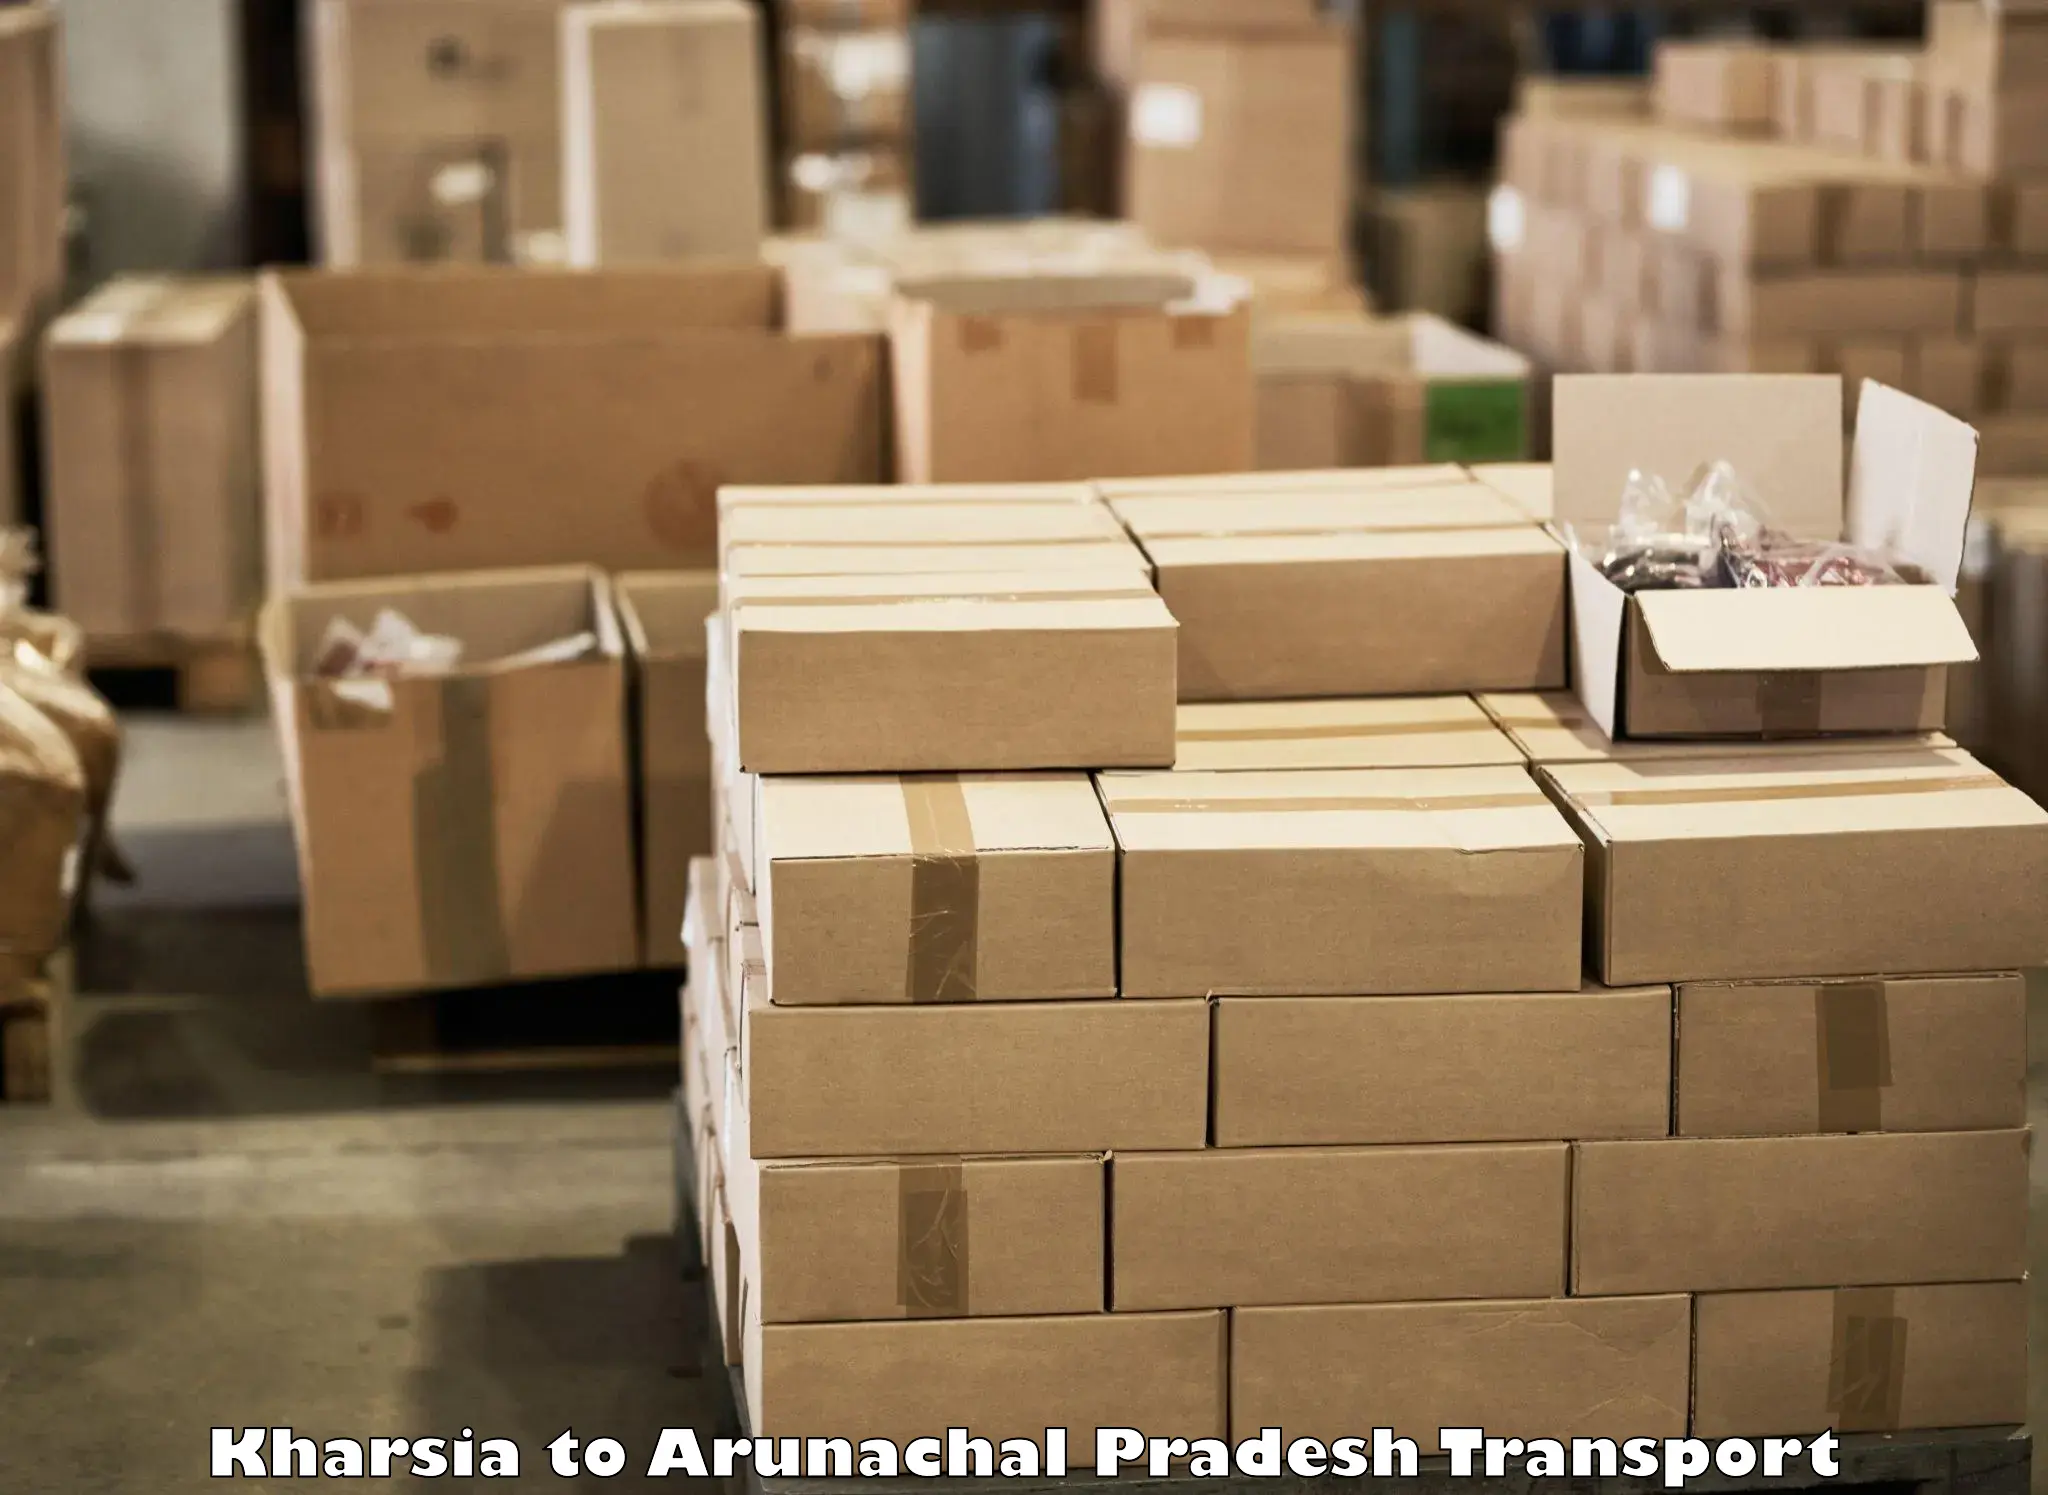 Truck transport companies in India Kharsia to Upper Siang